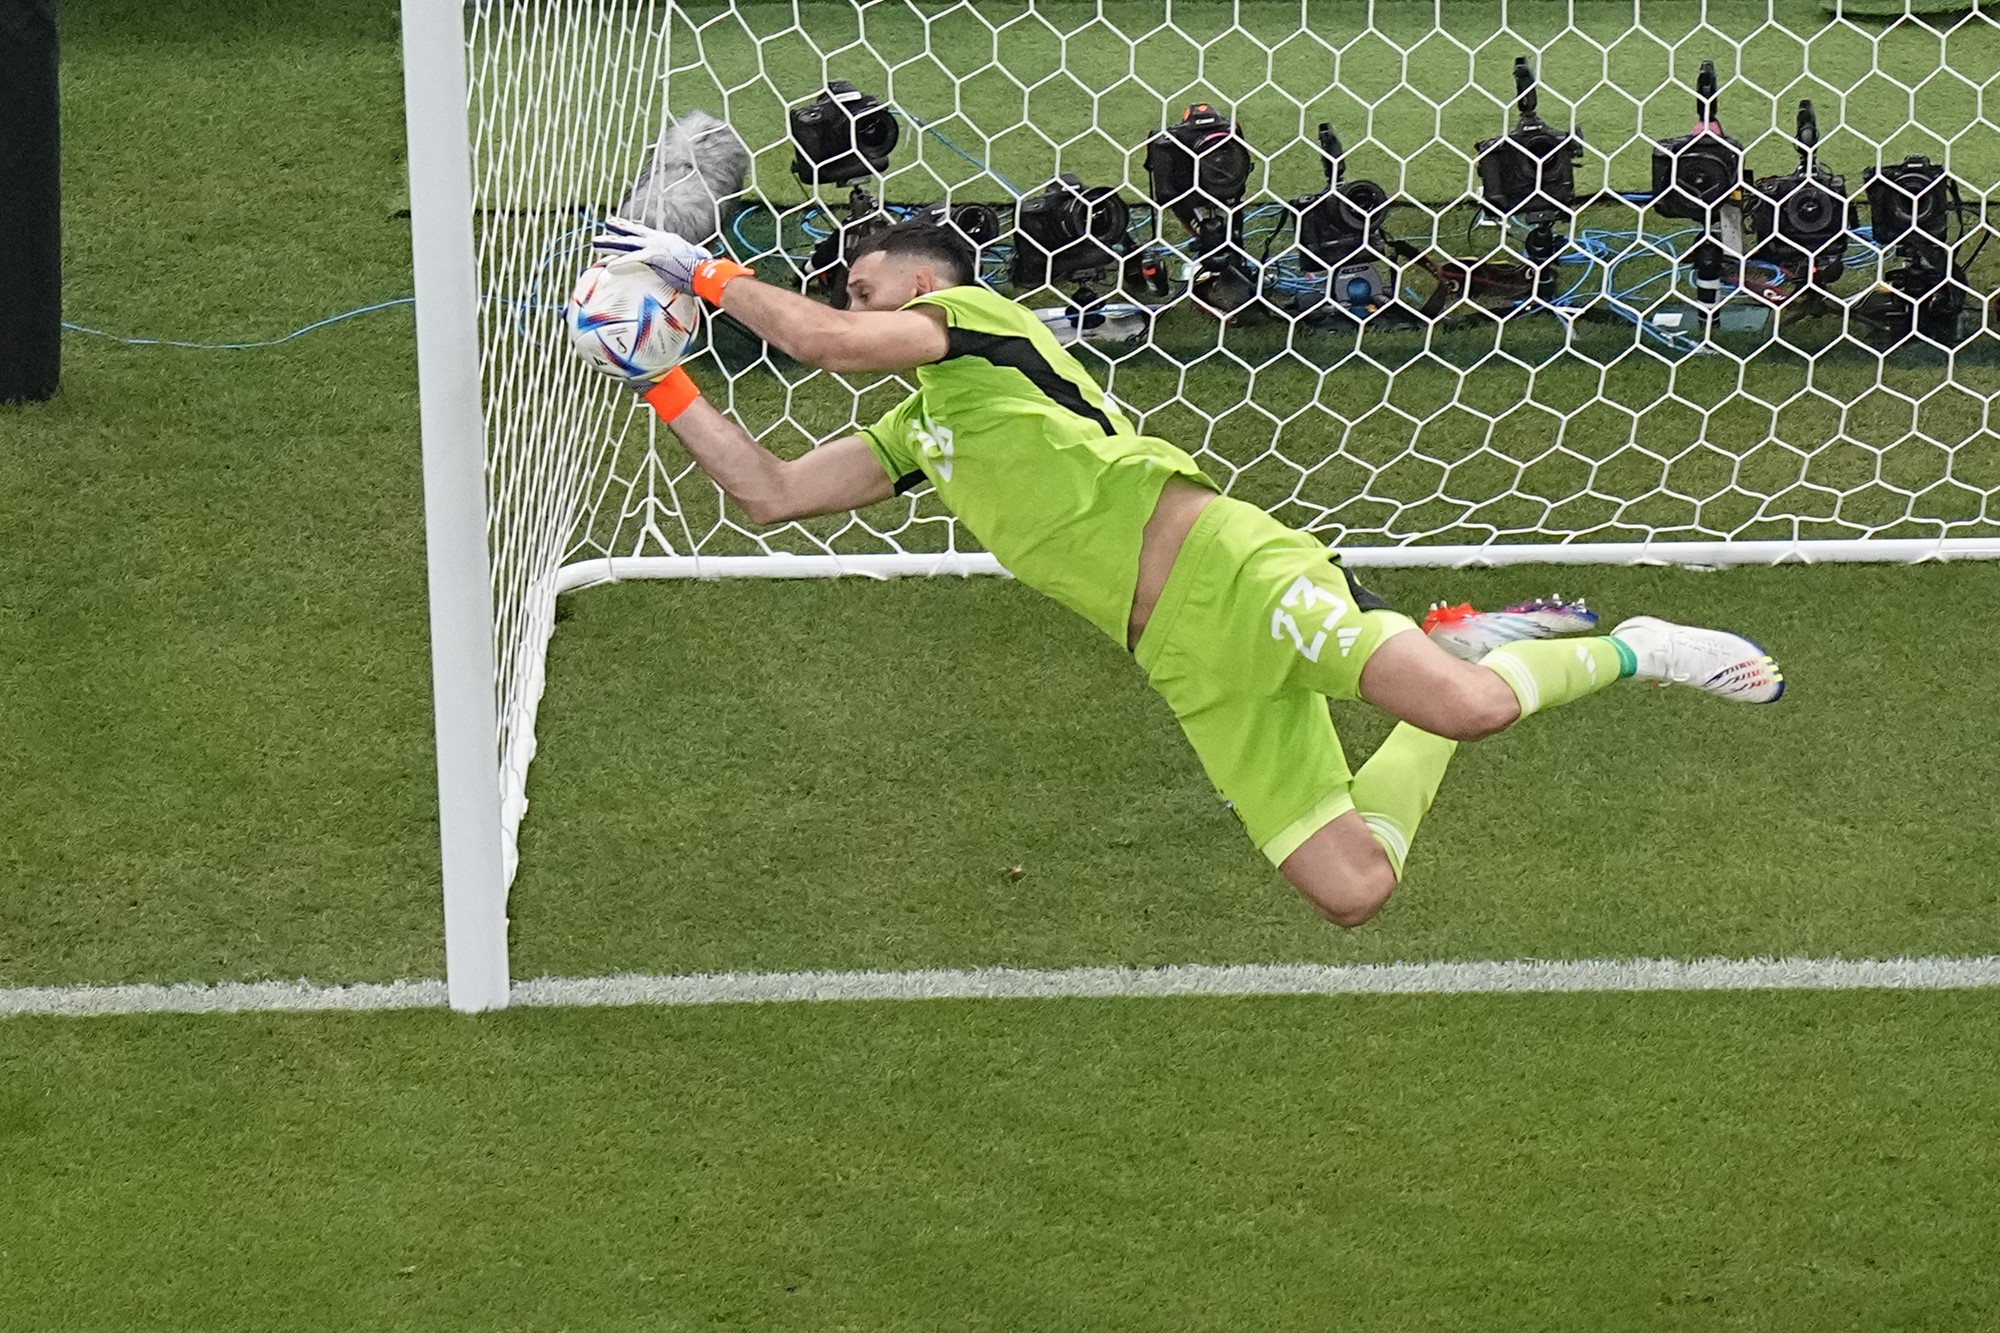 An Argentinian goalkeeper dives to his right to grab the ball near the corner of the net.